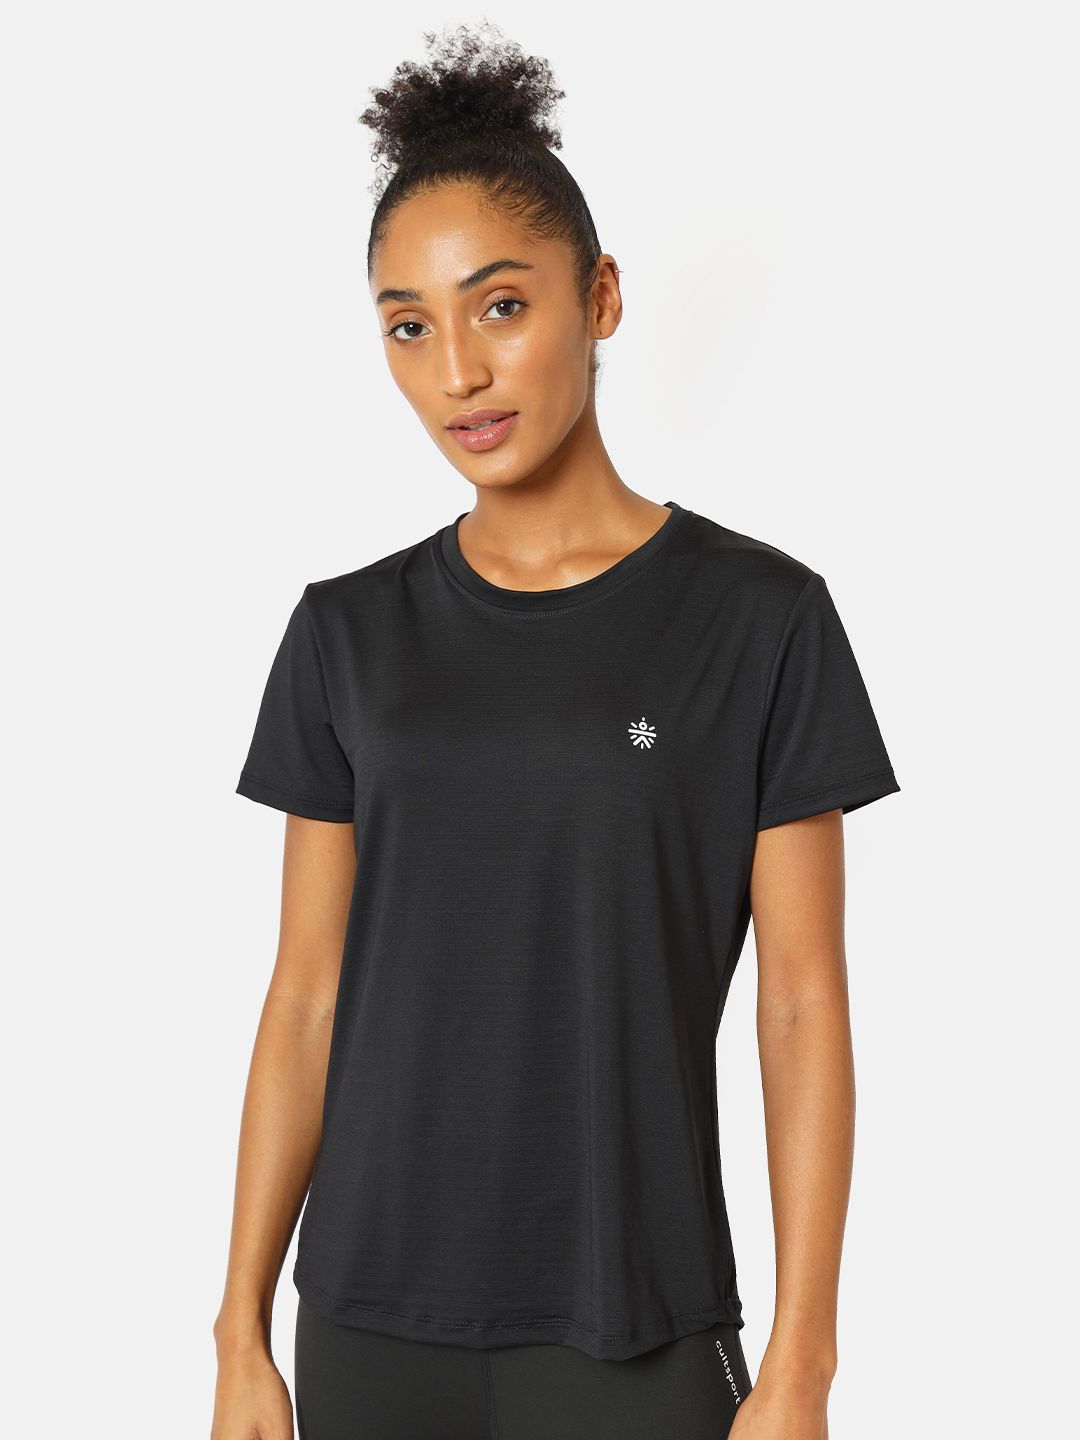 Cultsport Women Black Solid Active T-shirt With Logo Price in India